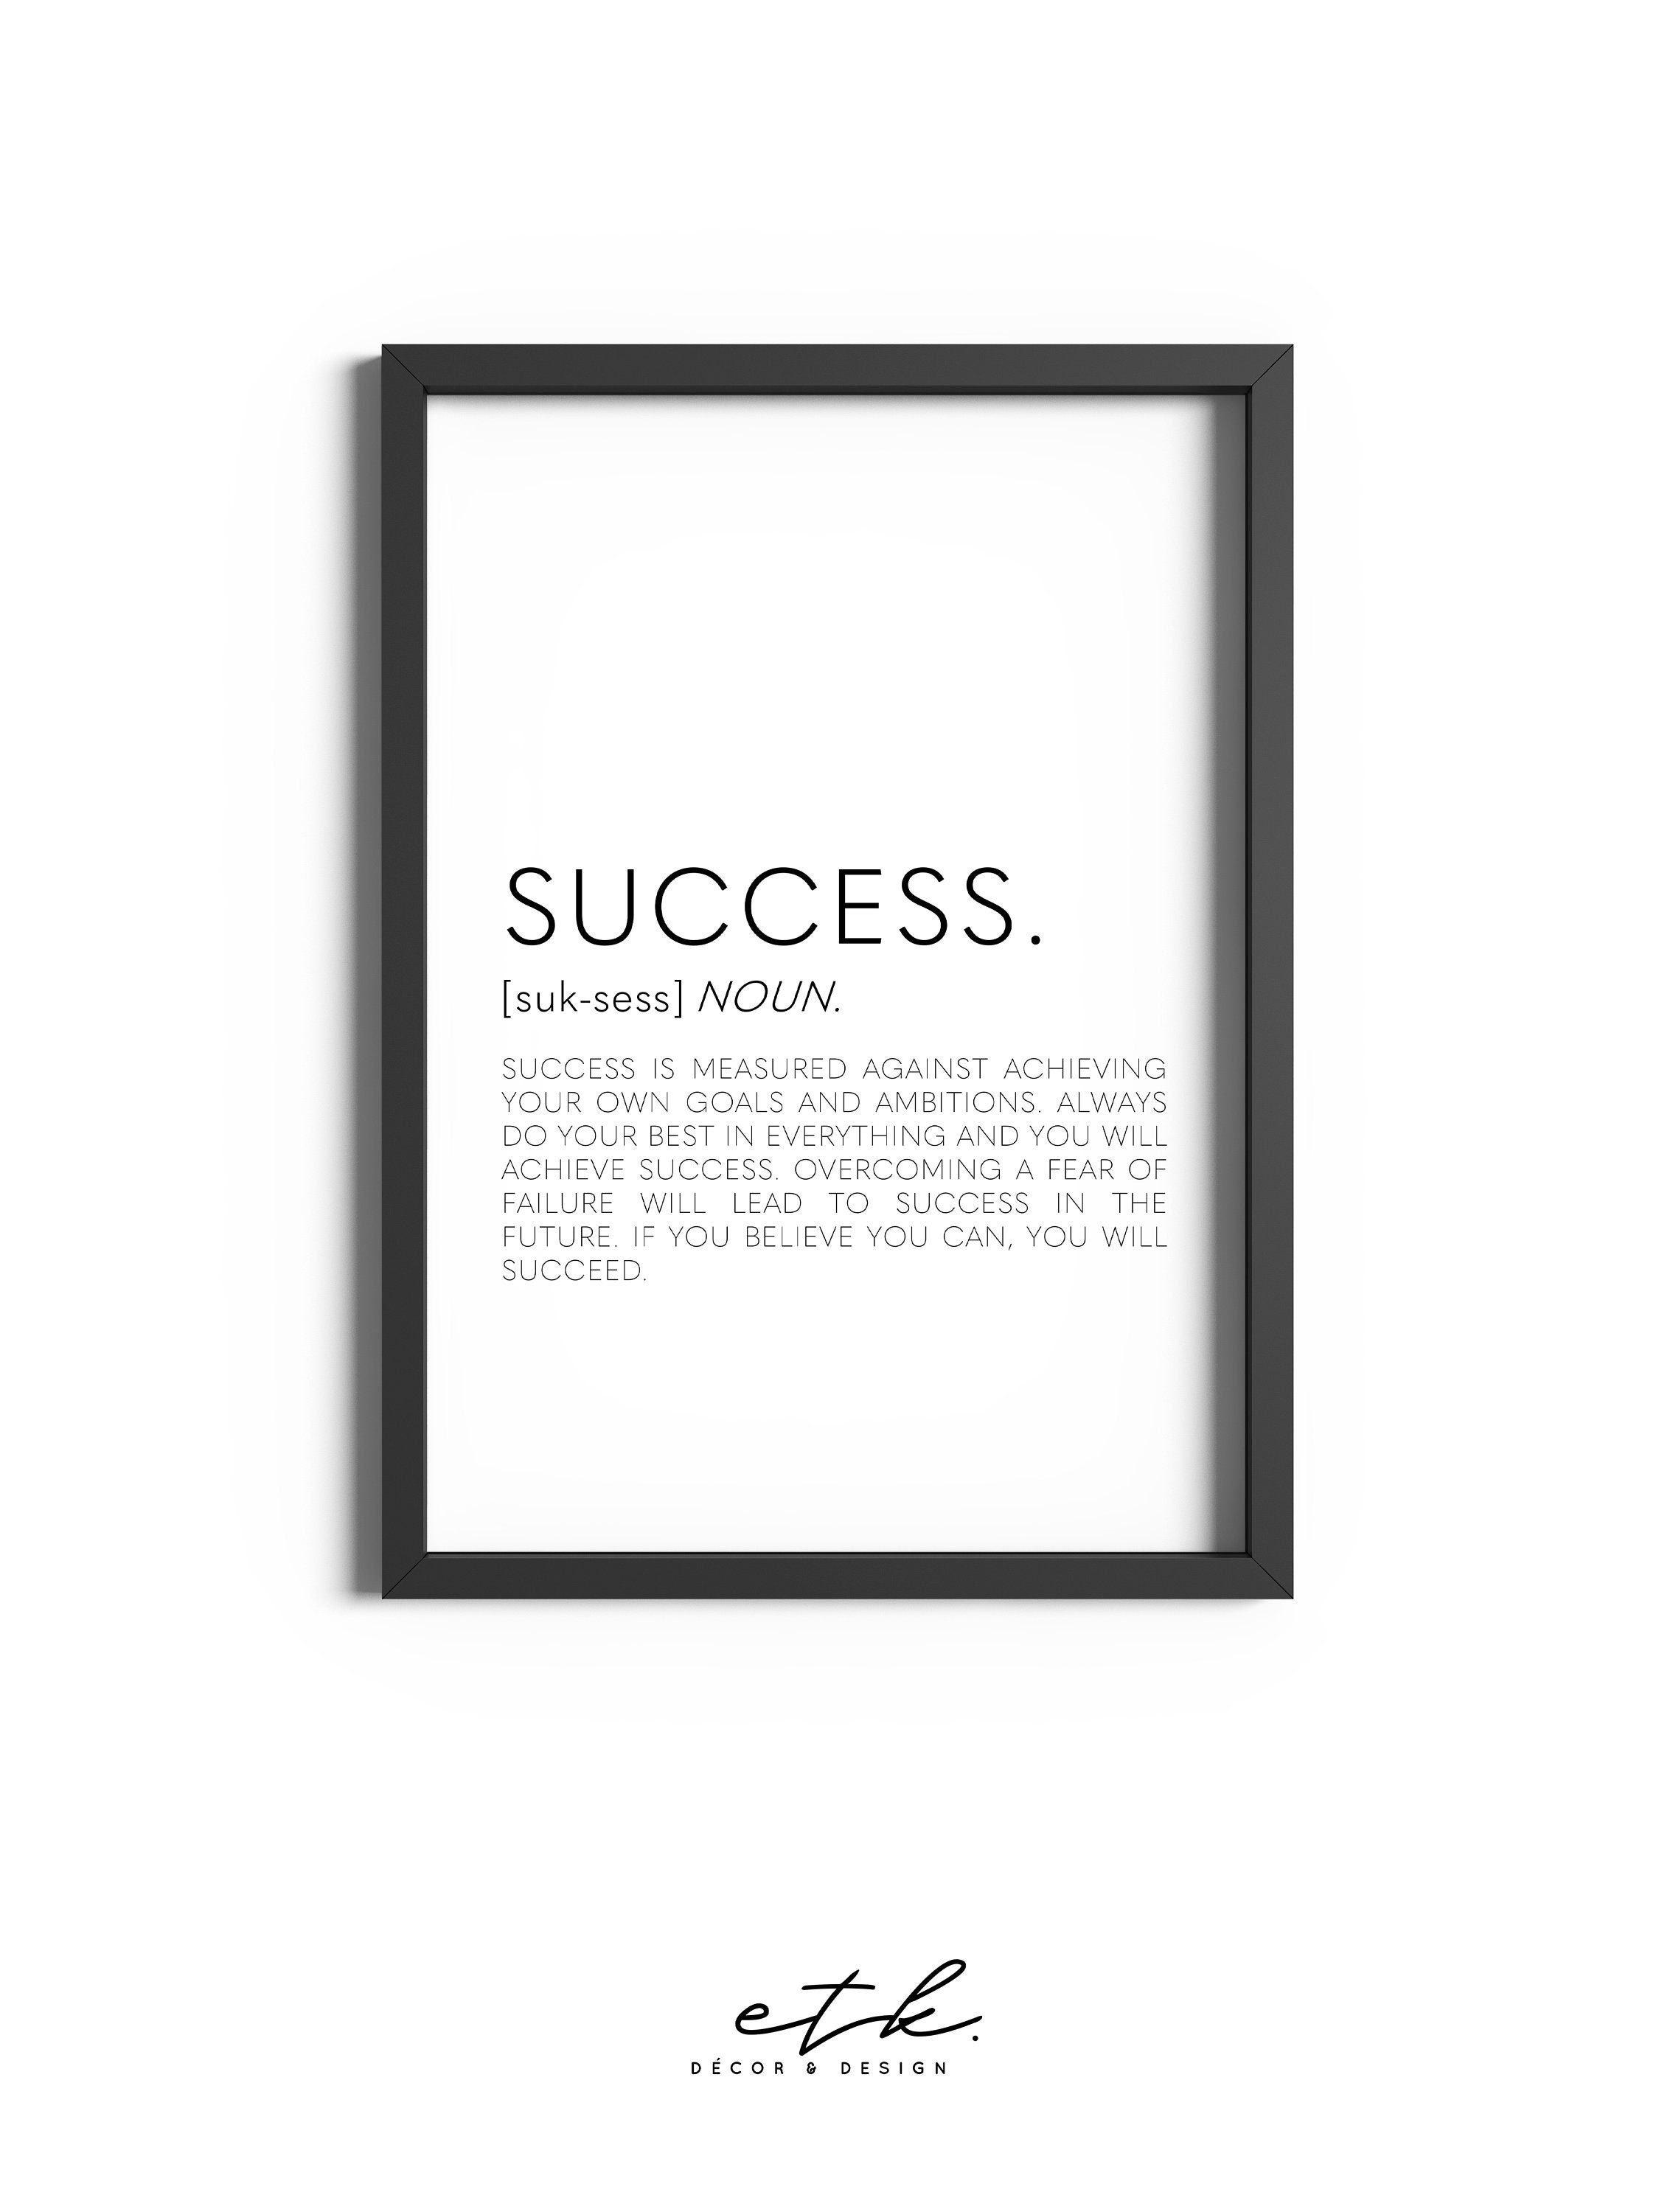 Success Definition, Office Wall Art, Home Office Print, Inspirational  Quotes Prints, Home Décor, Motivational Print, Home Office Decor - .de